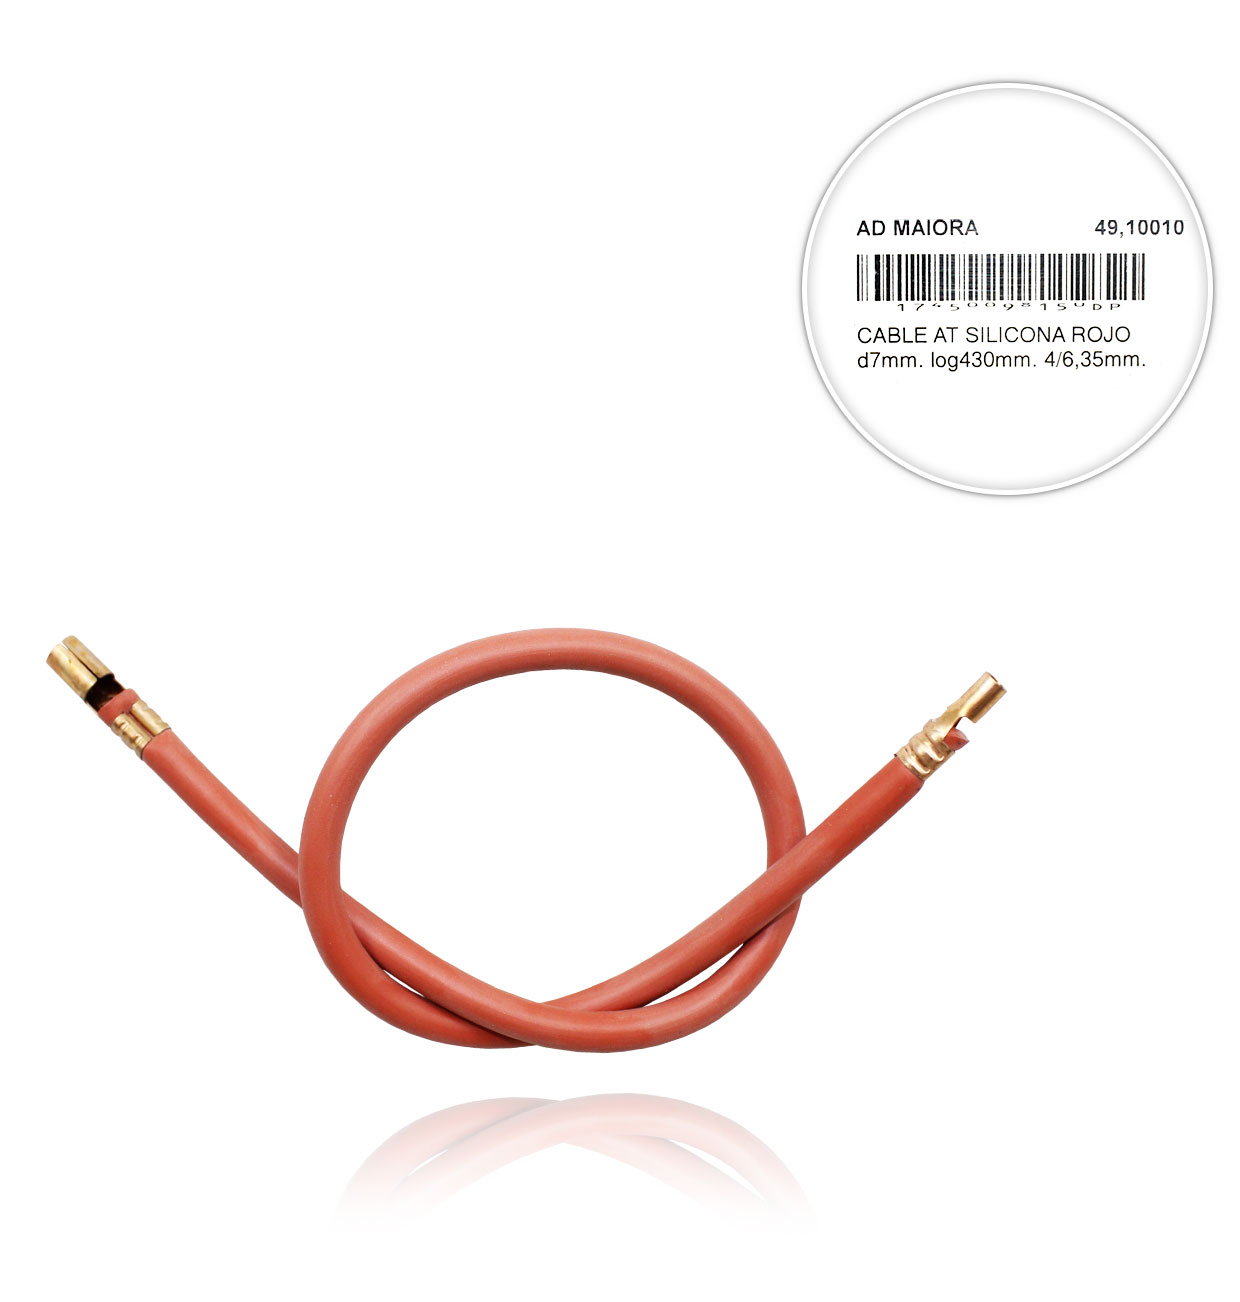 RED SILICONE CABLE AT d7mm. log430mm. 4/6,35mm.